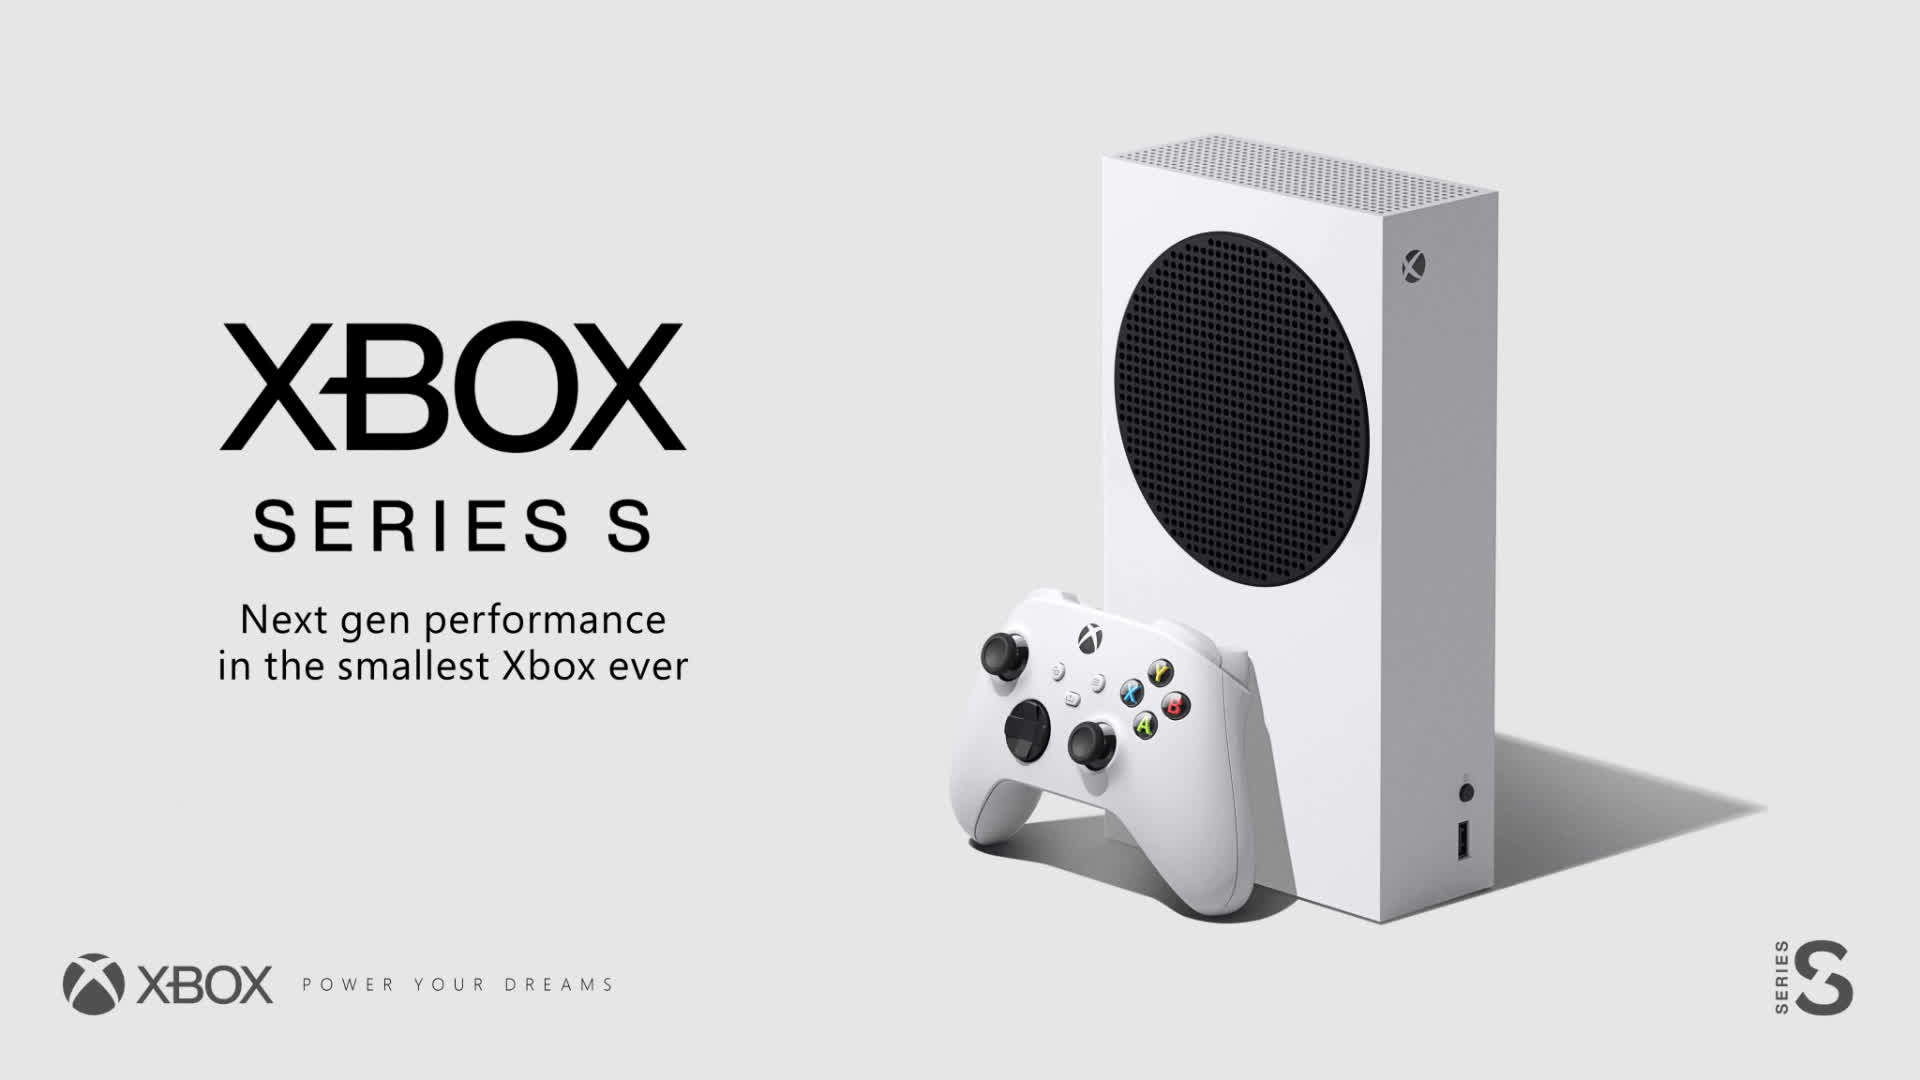 Xbox Series S and Series X arrive on November 10 for $299 and $499